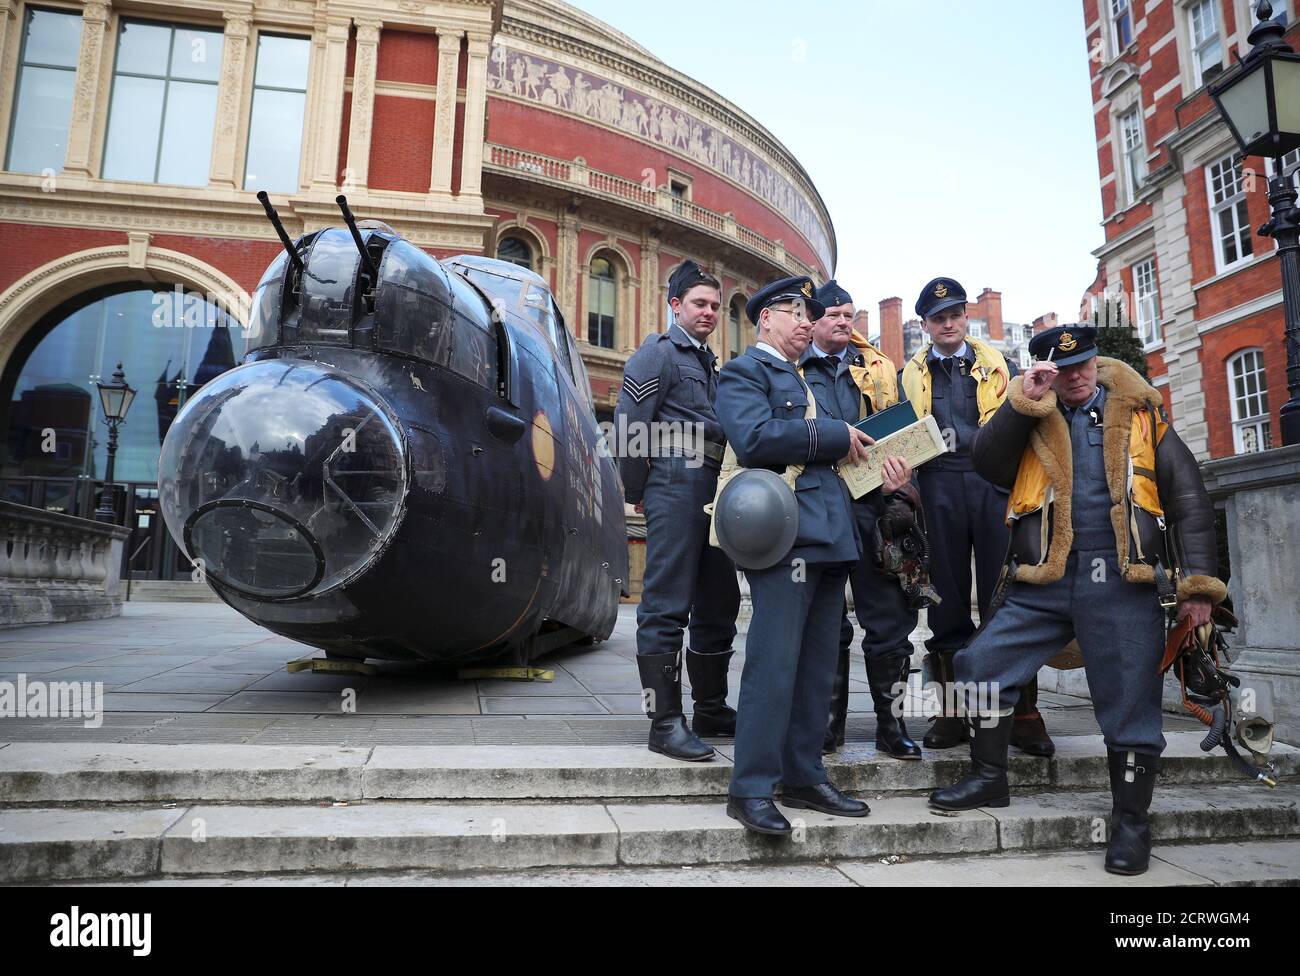 Military reenactors pose next to a model of the cockpit of a Lancaster bomber as they promote events to mark the 75th anniversary of the Dambuster raids to raise money for the RAF Benevolent Fund, outside the Royal Albert Hall in London, Britain, February 26, 2018. REUTERS/Hannah Mckay Stock Photo